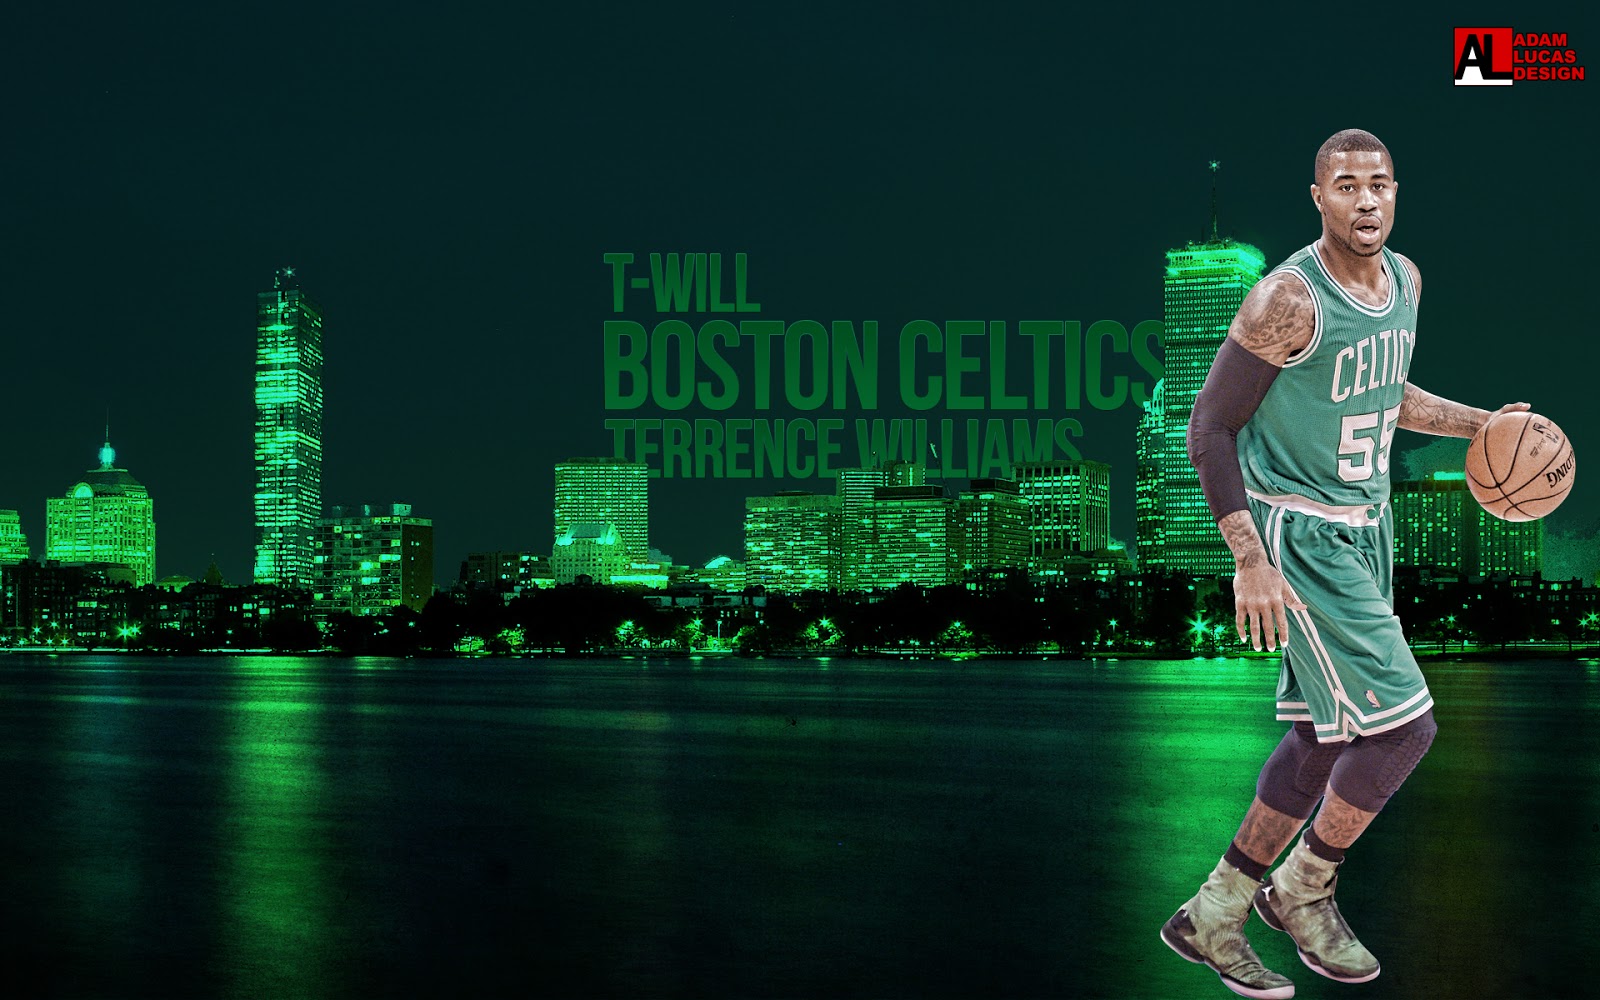 Wallpaper Wednesday: Officially 4 Years a Celtic